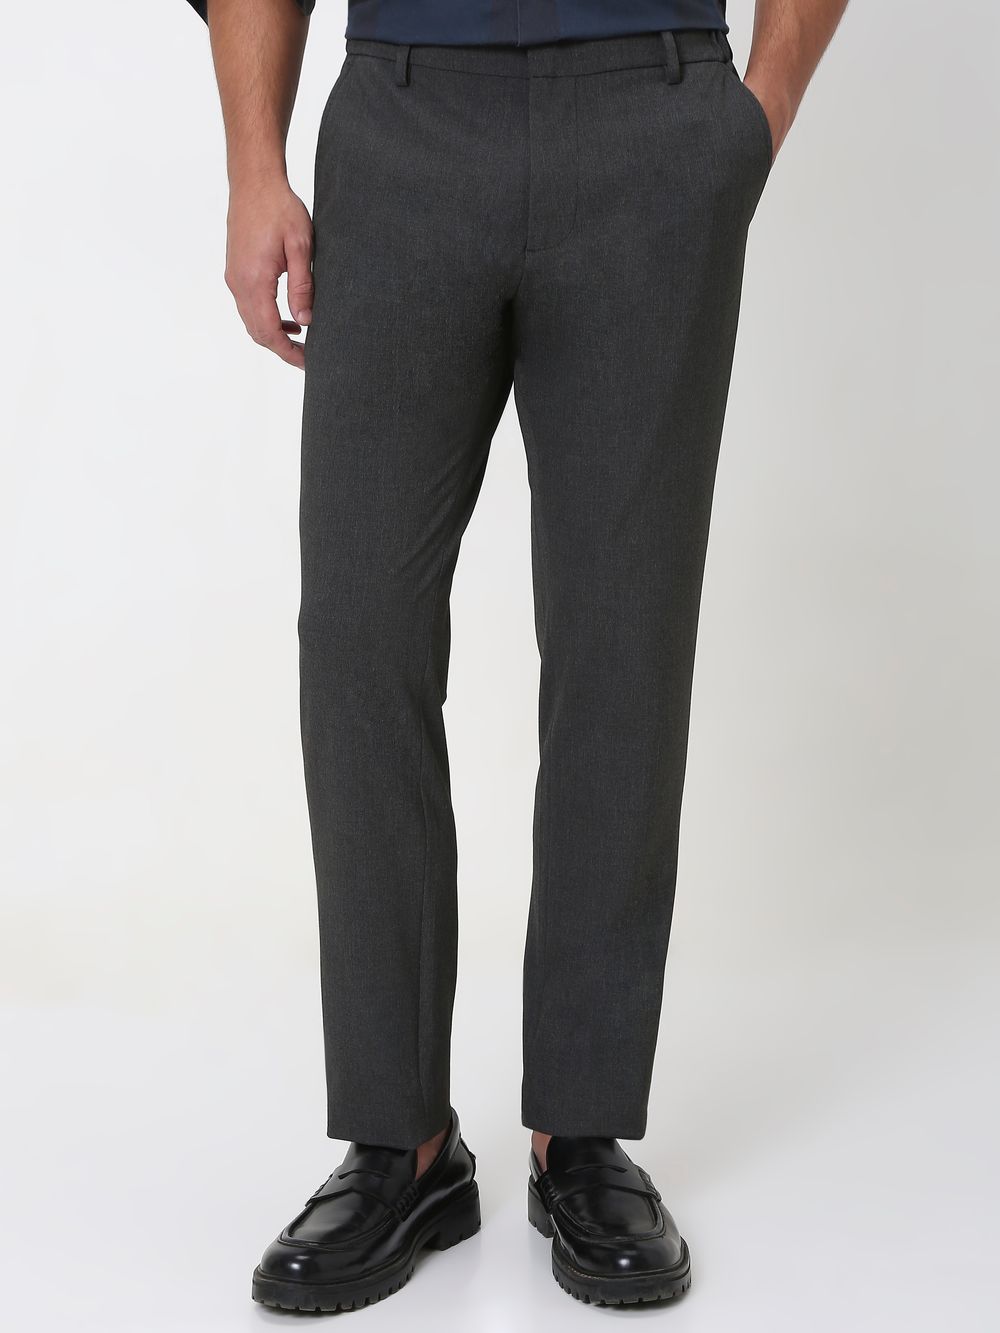 Black Slim Fit Textured Jersey Stretch Chinos Trouser